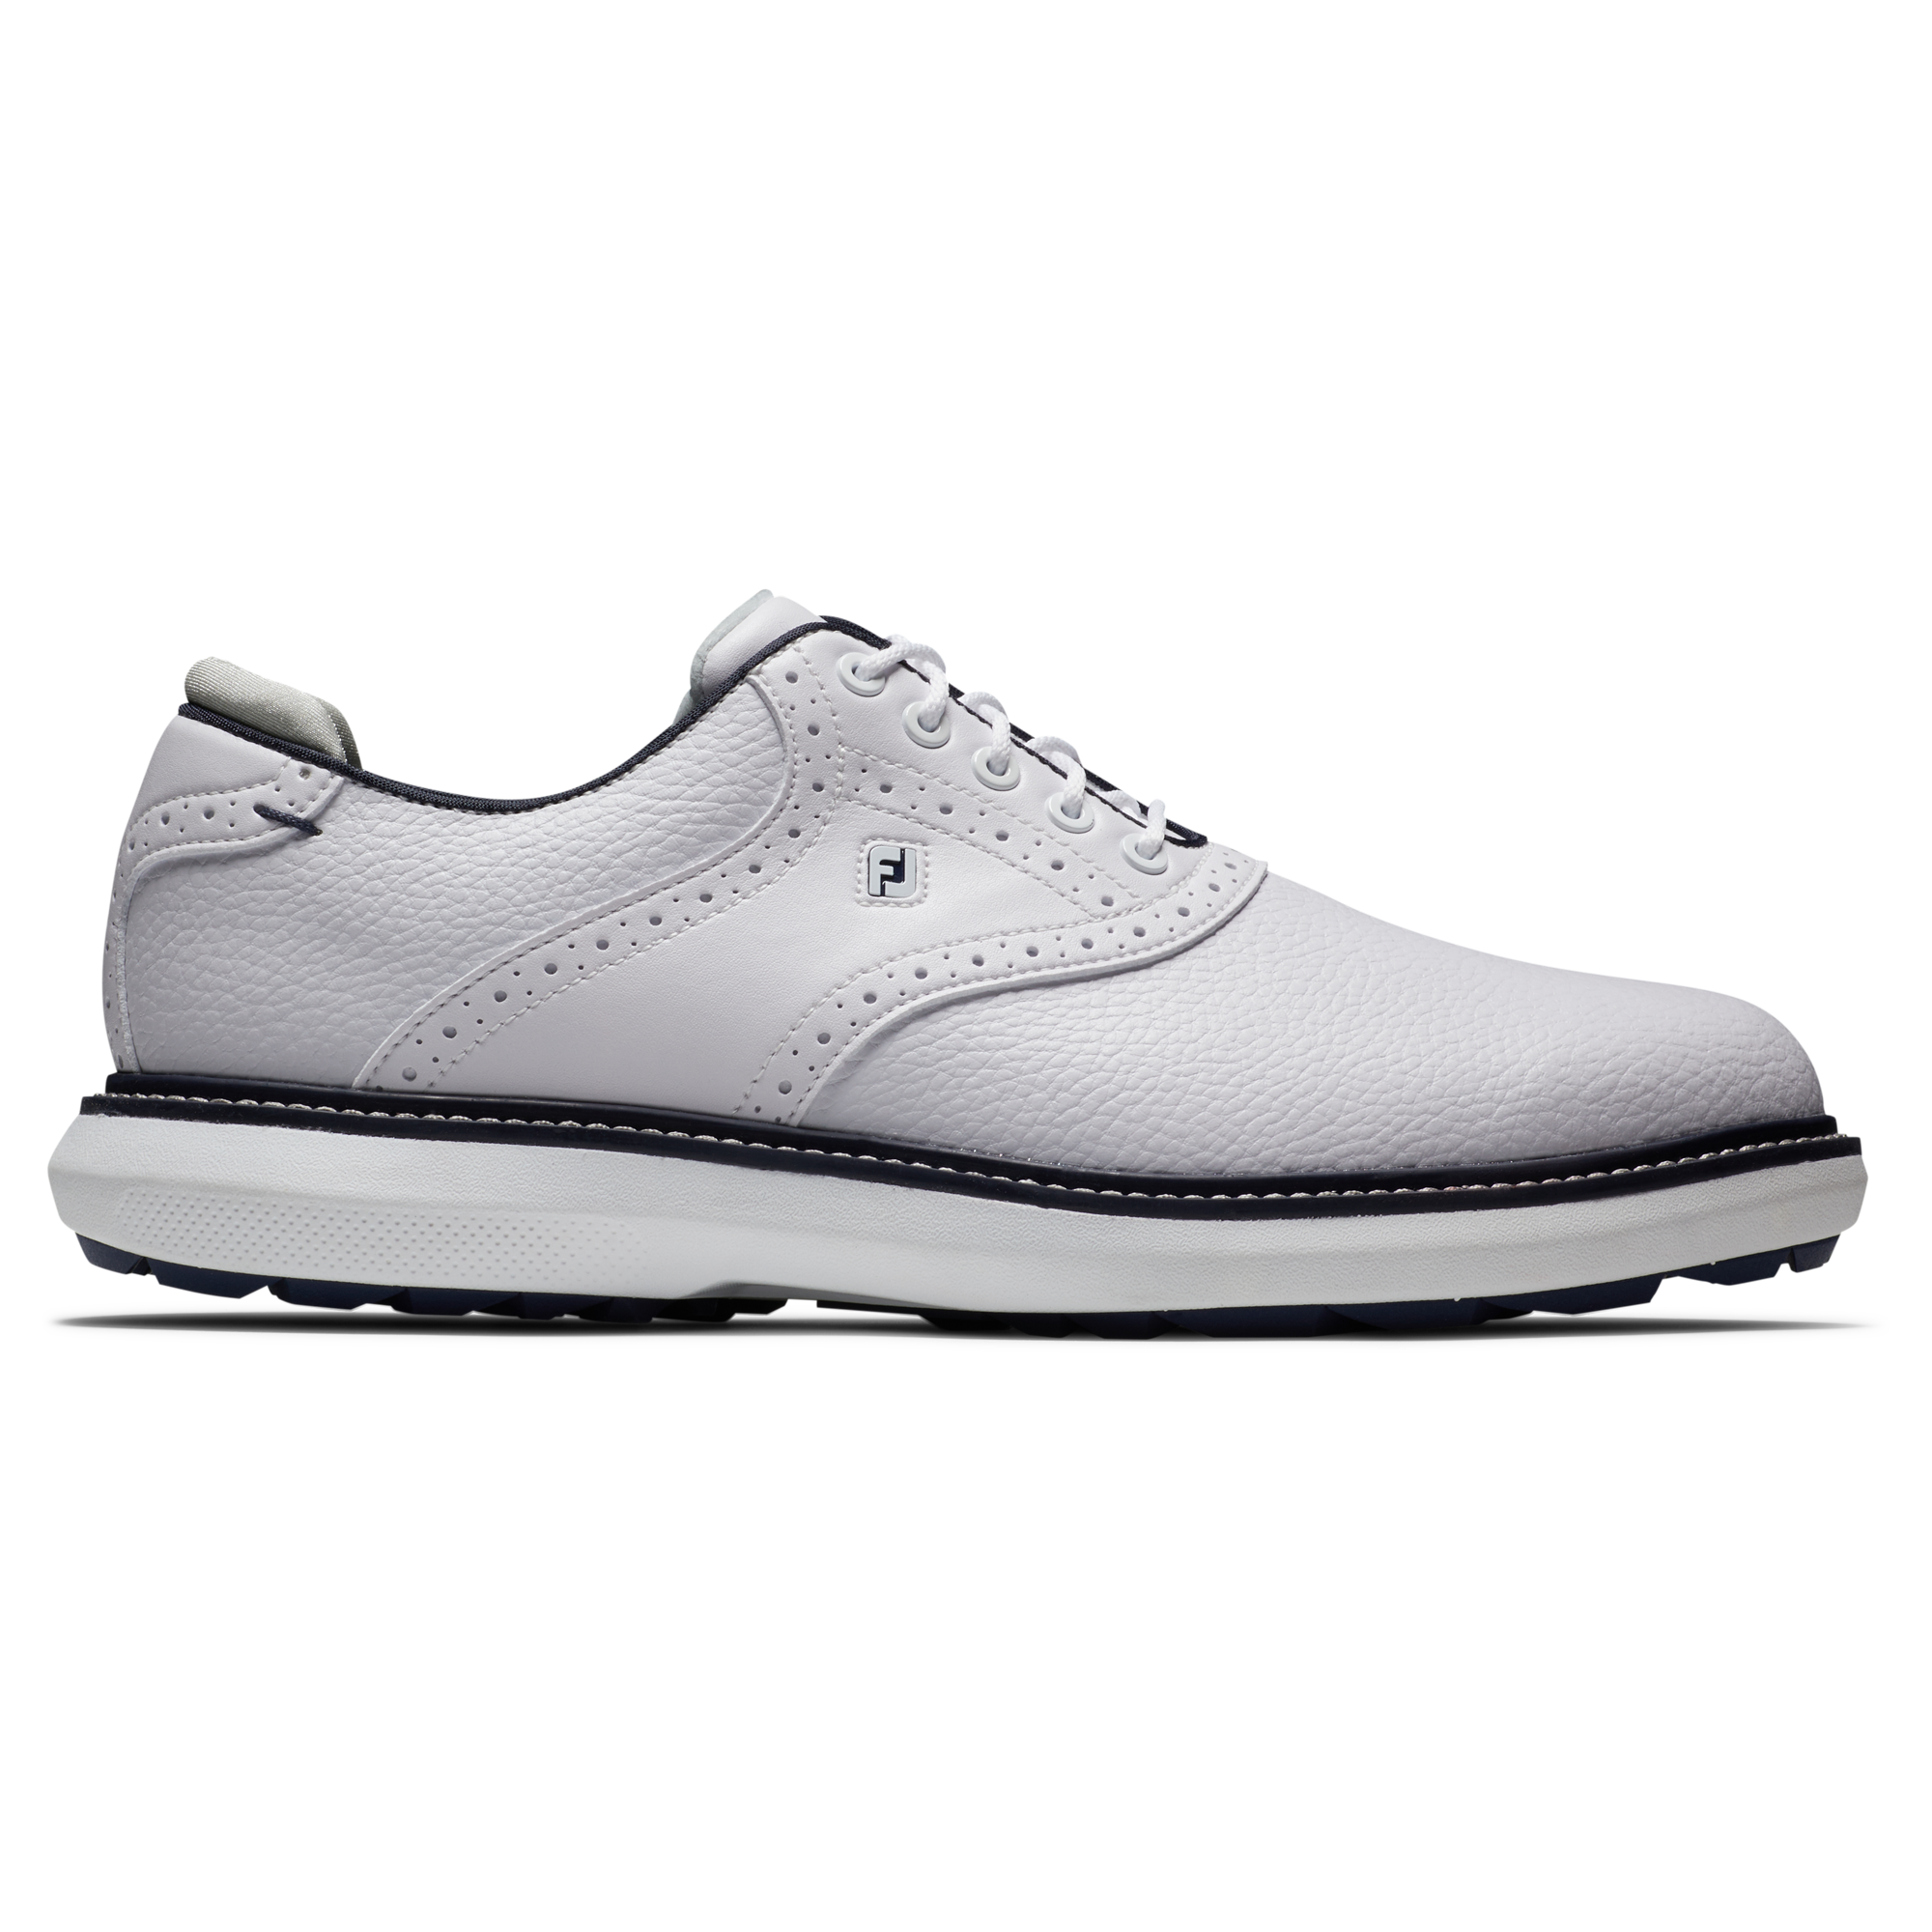 Men's Traditions Spikeless Golf Shoe - White | FOOTJOY | Golf